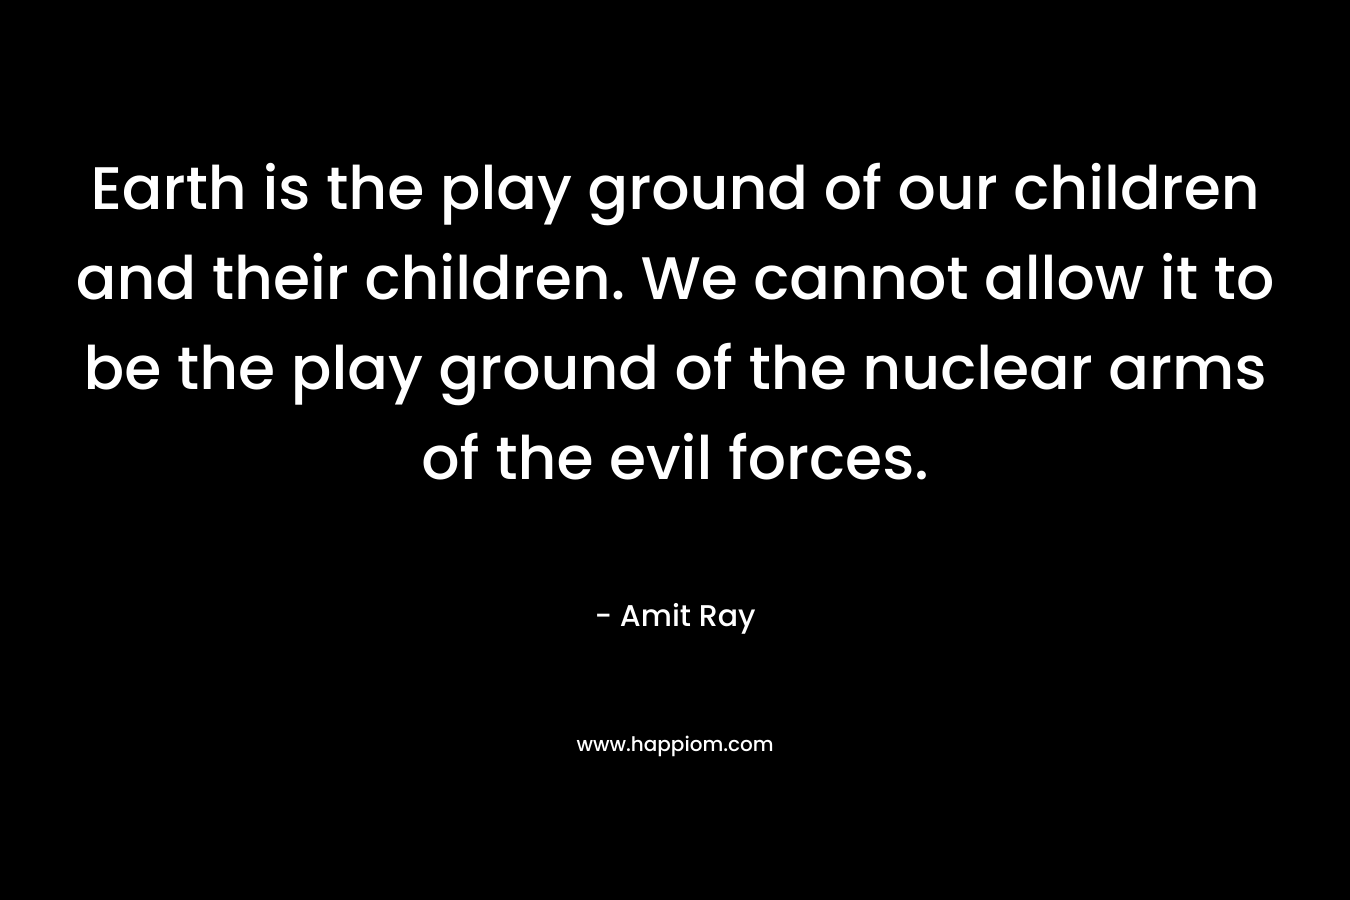 Earth is the play ground of our children and their children. We cannot allow it to be the play ground of the nuclear arms of the evil forces.